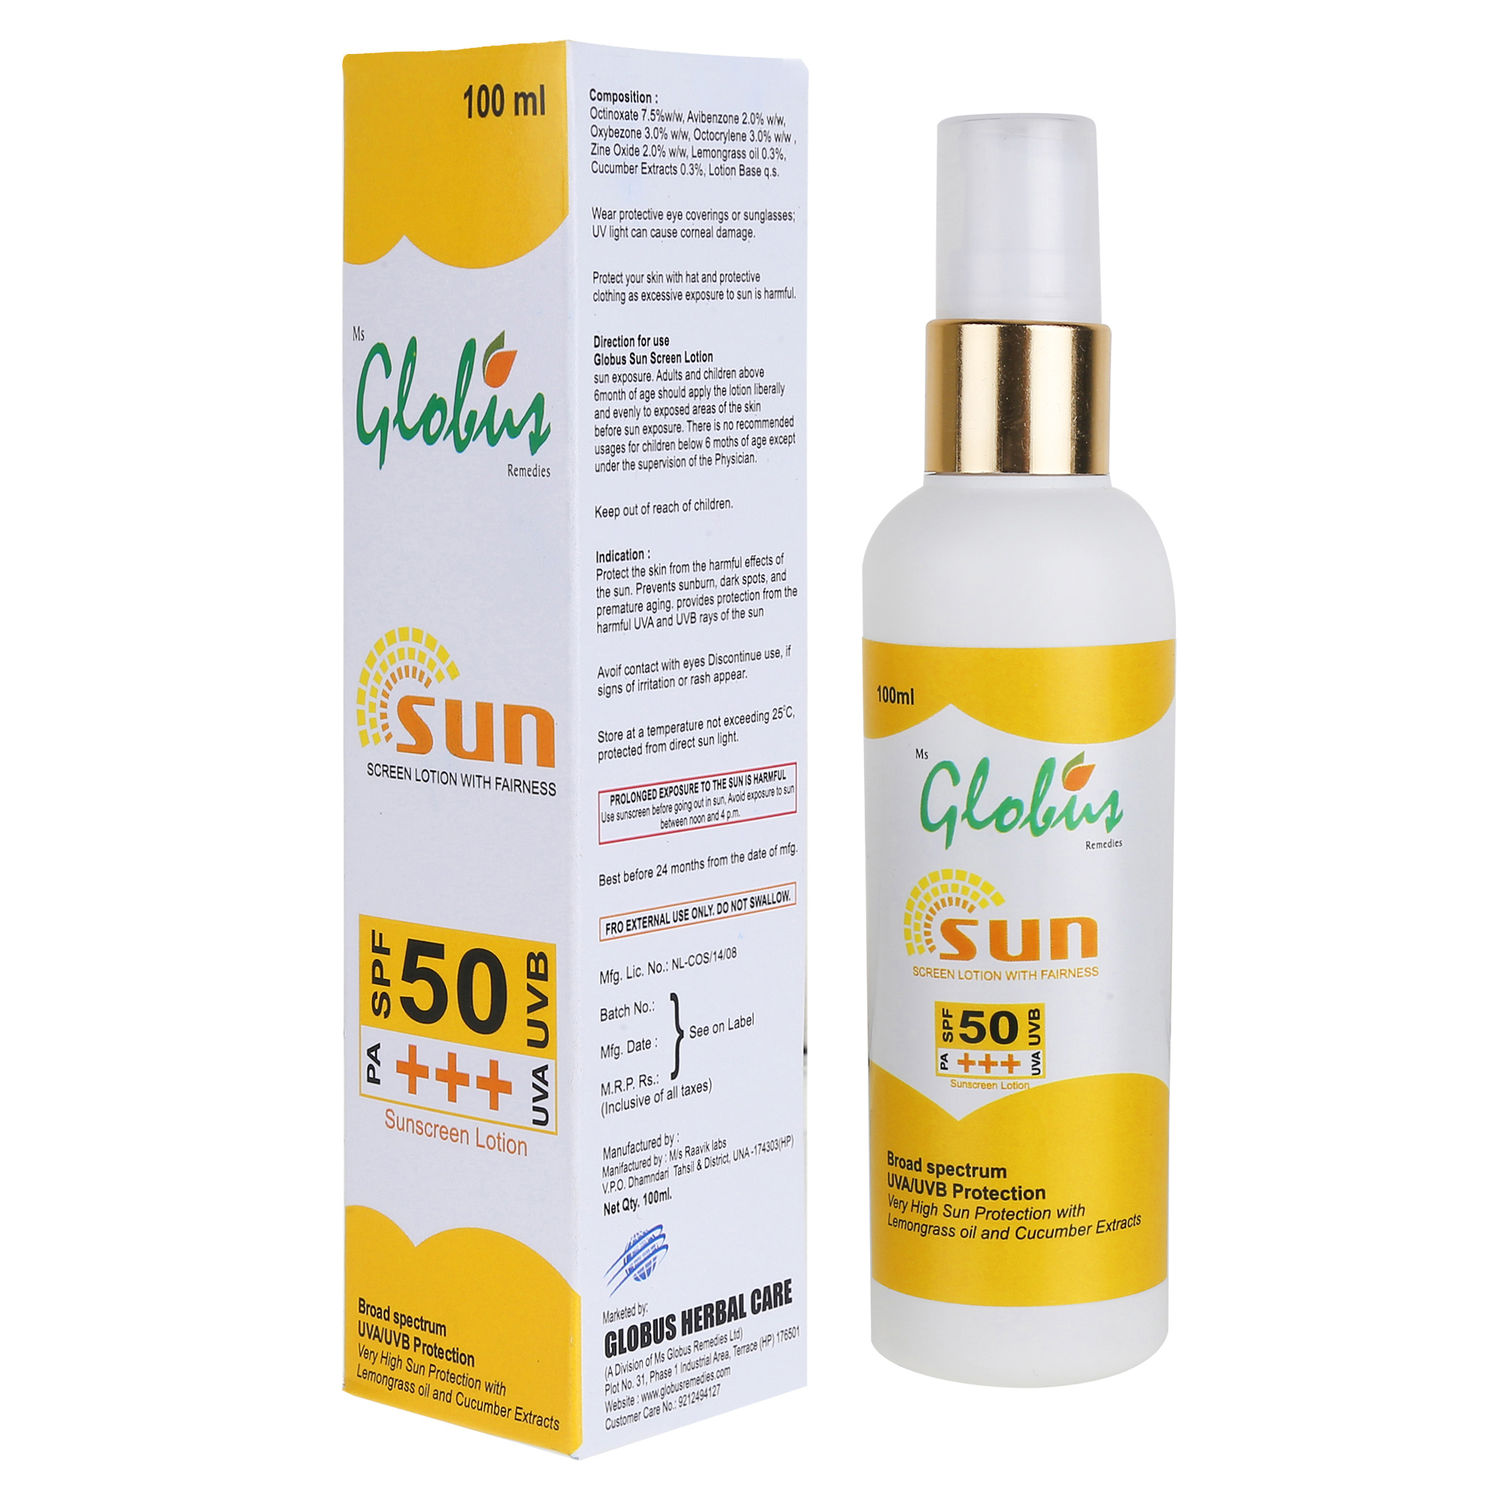 Buy Globus Remedies Sunscreen Lotion With Fairness - Spf 50 Pa+++ (100 ml) - Purplle